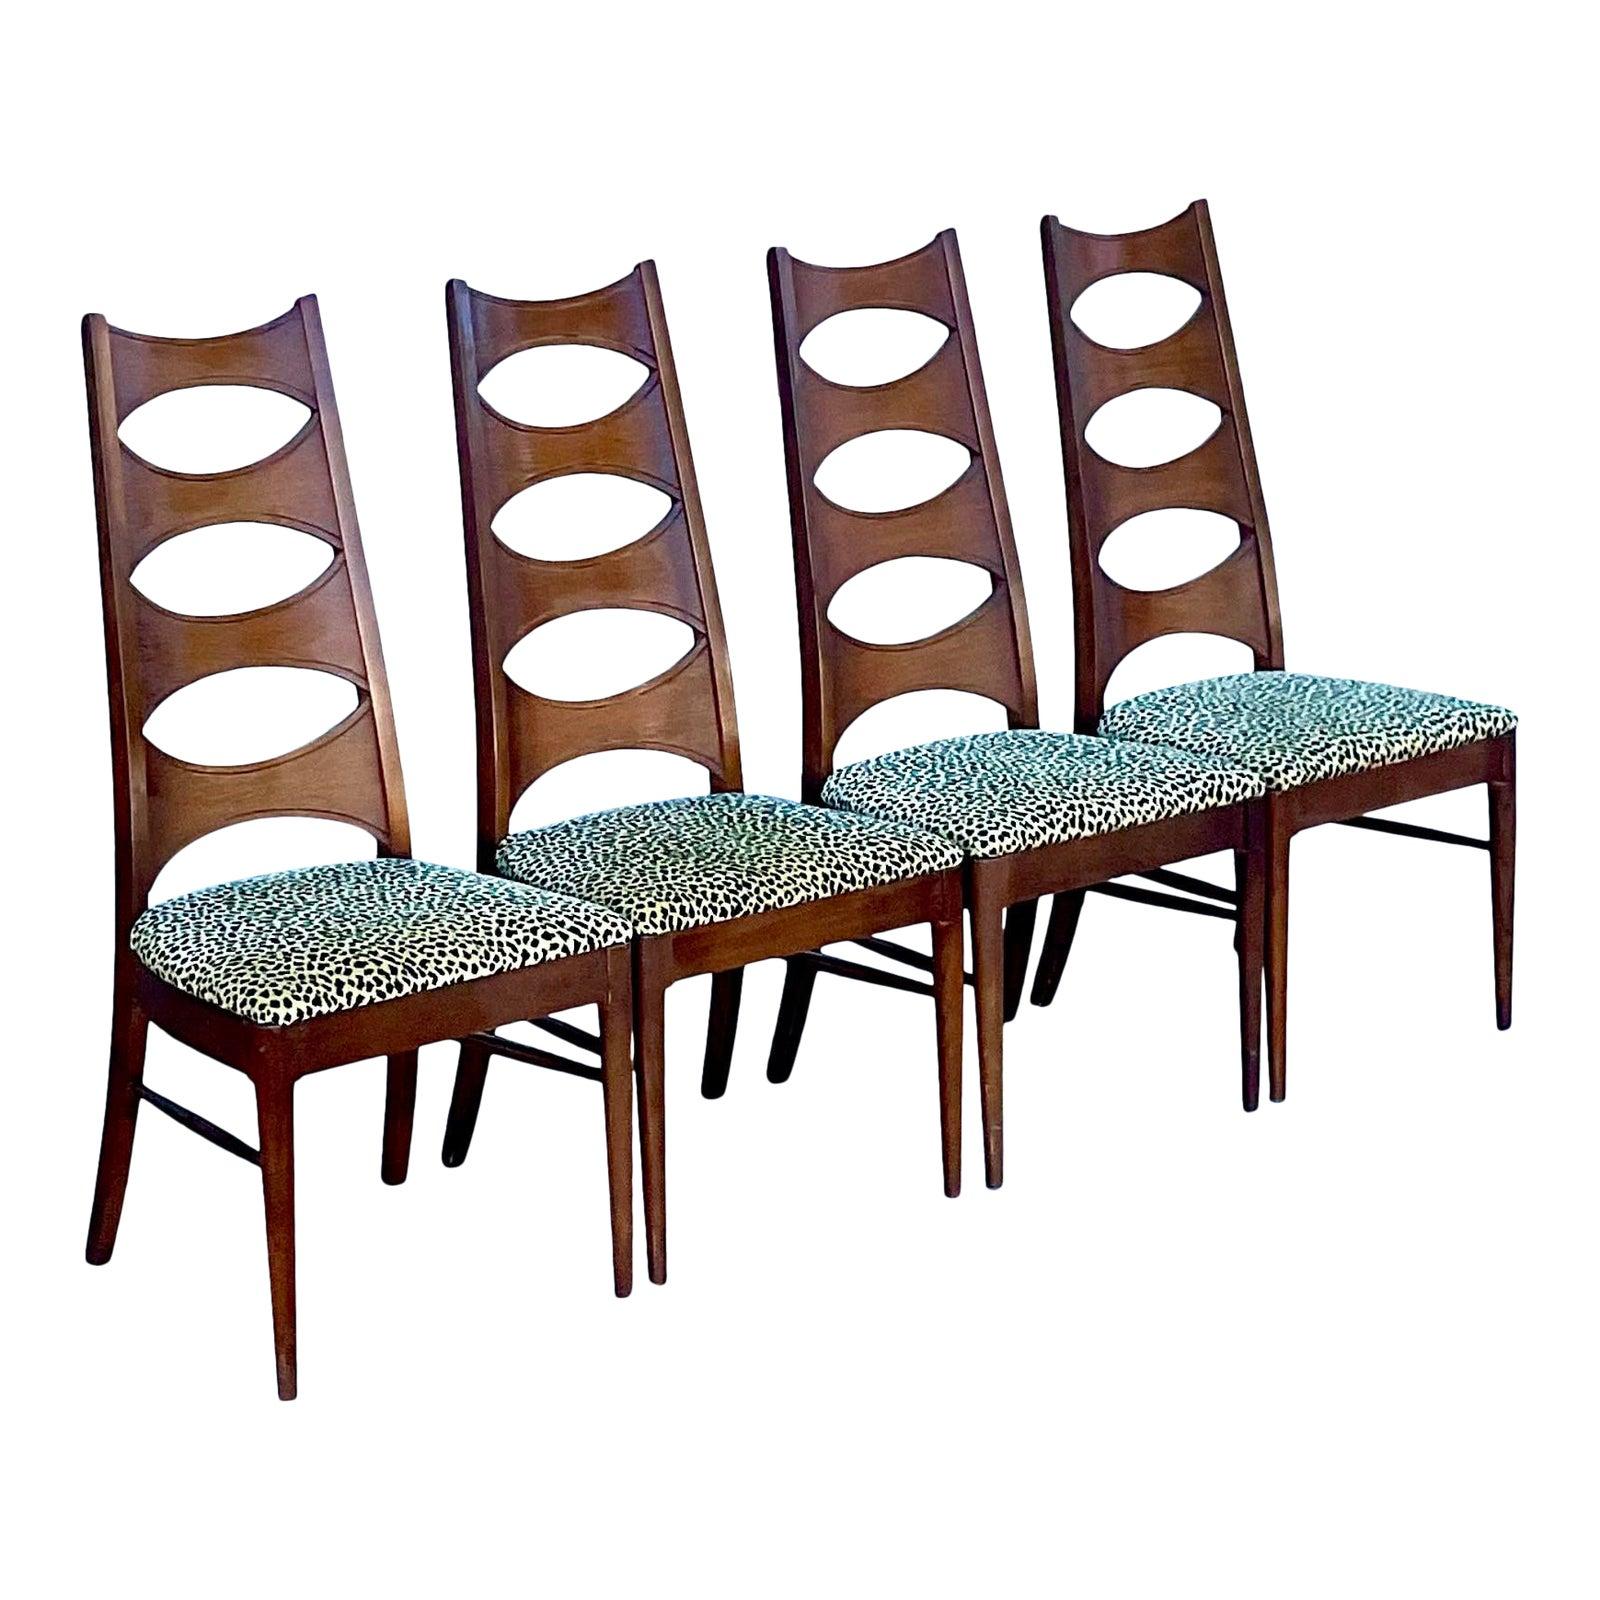 A fantastic set of 4 Kent Coffey dining chairs. Part of the iconic Perspecta collection. The chairs are the coveted “Cats Eye” design. Leopard upholstery for a little extra sexy. A real collectors set. Unmarked. Acquired from a Palm Beach estate.